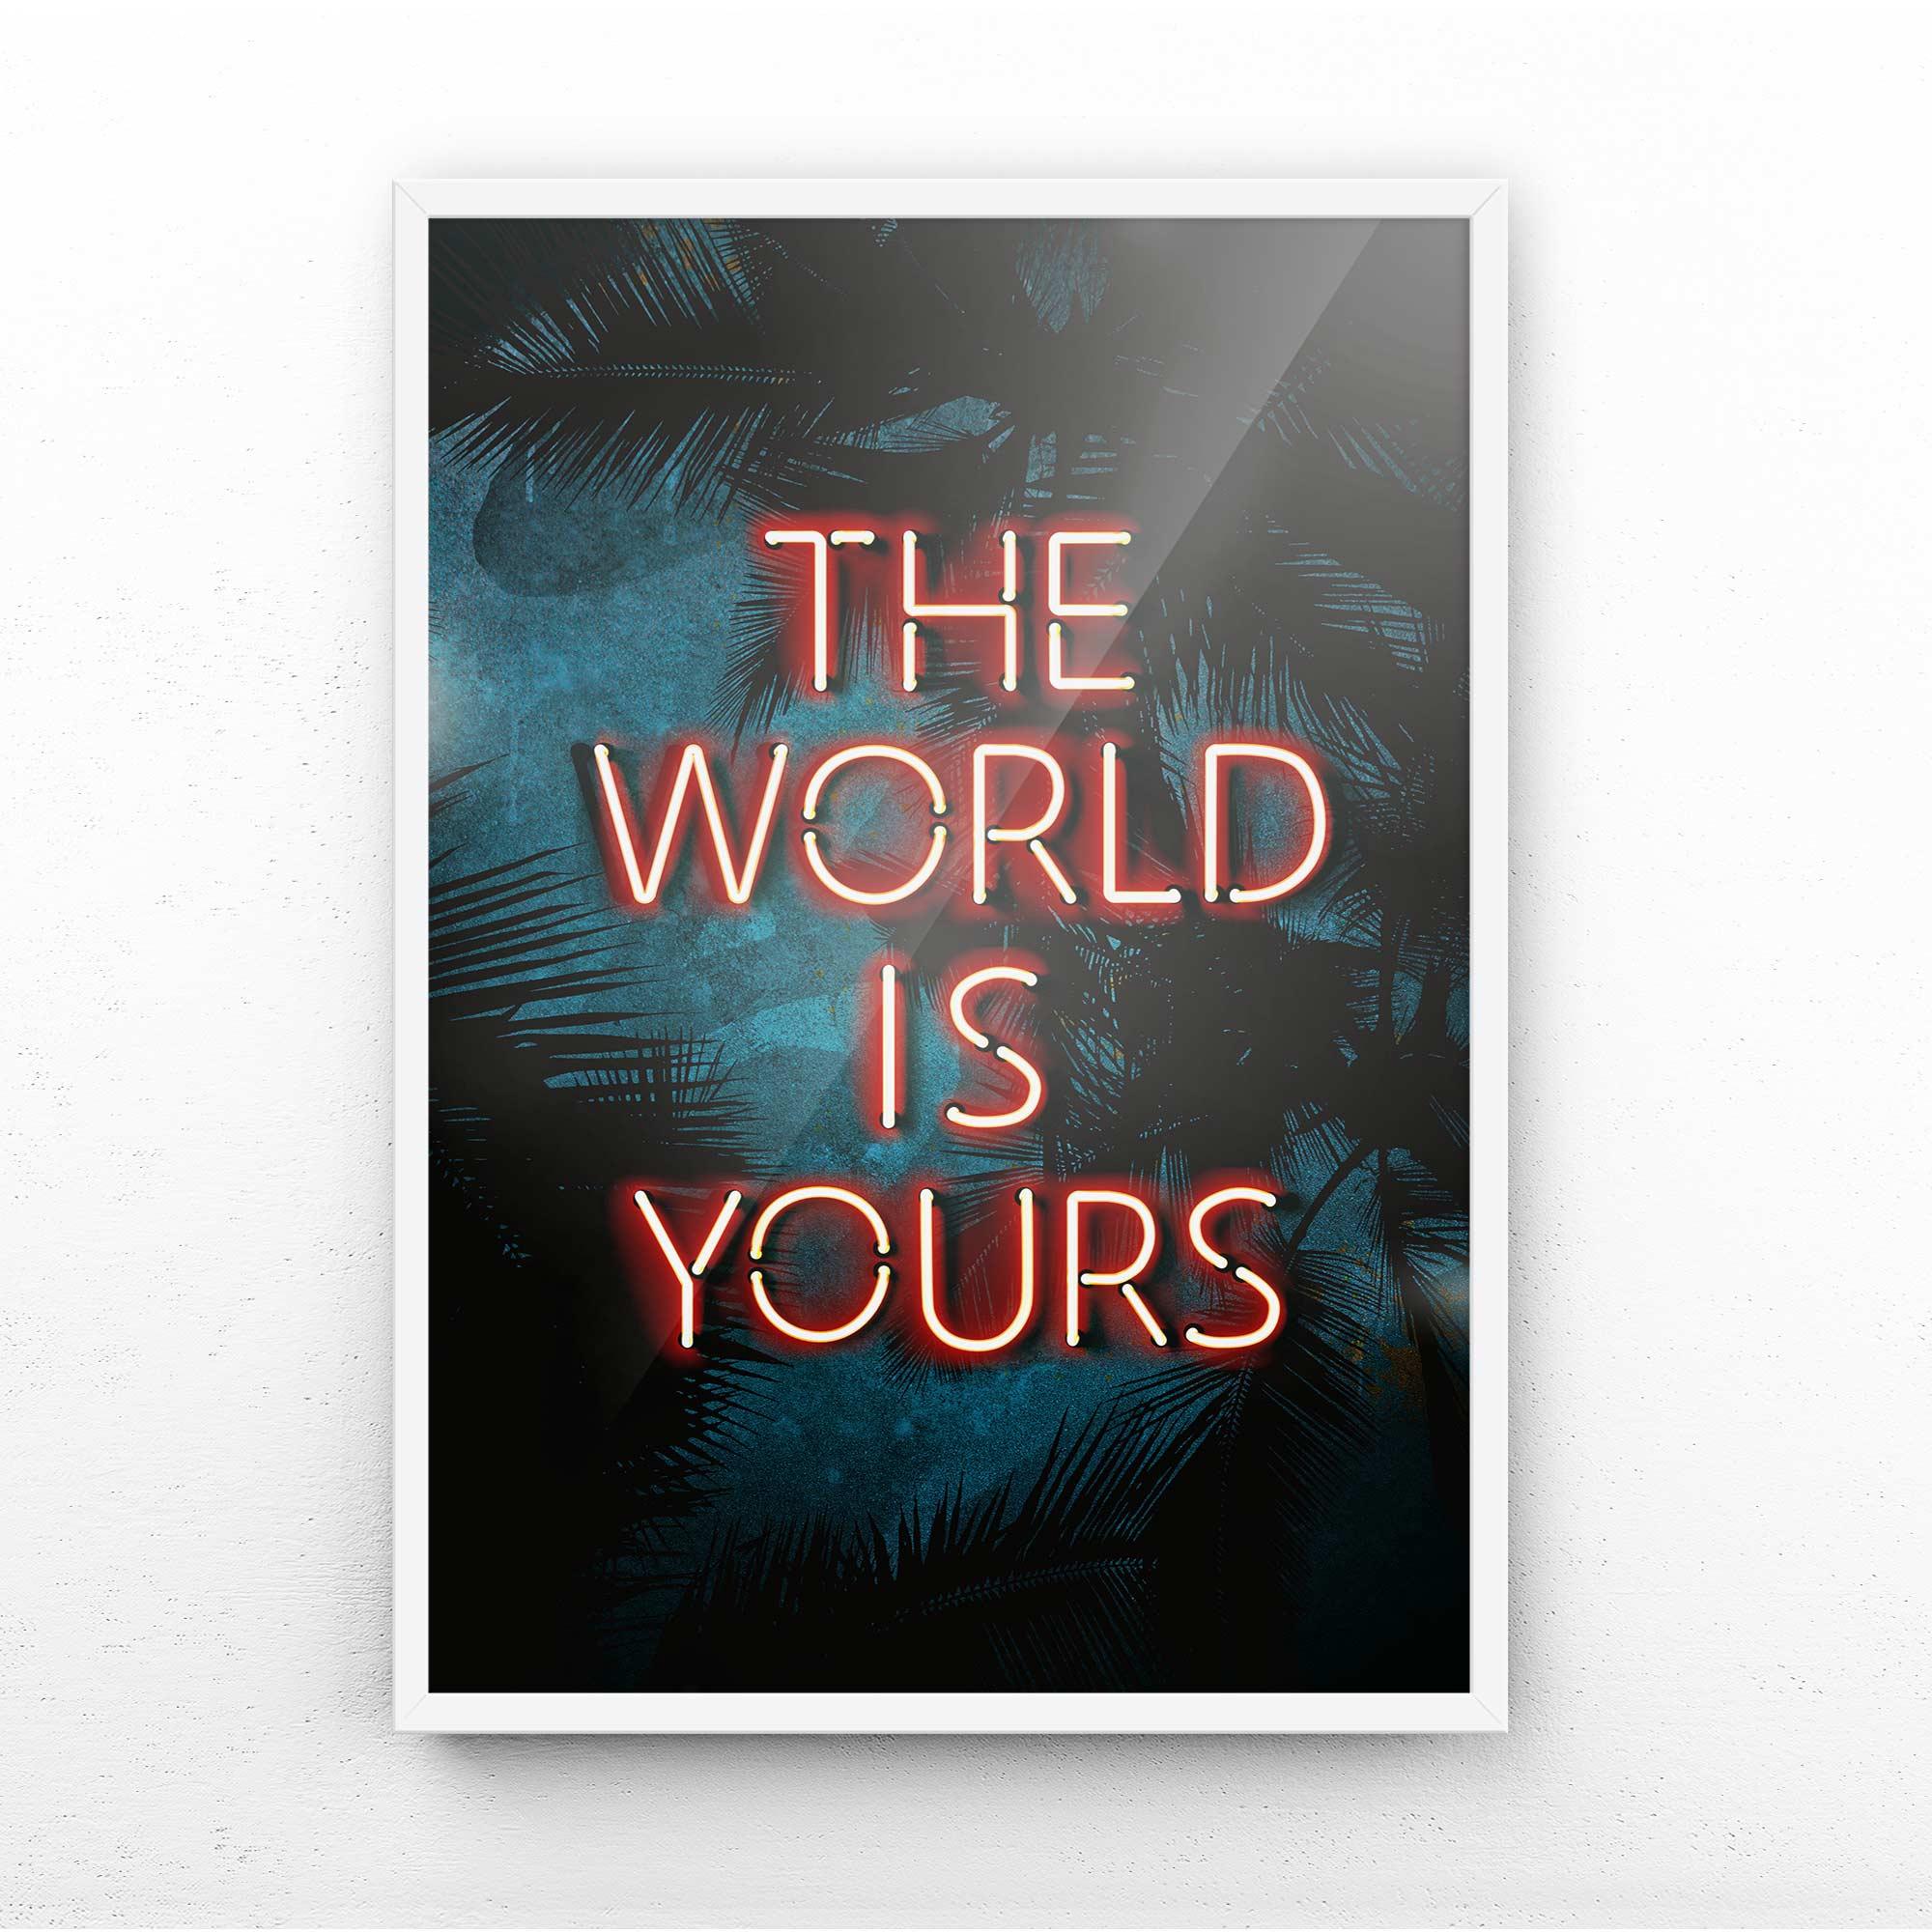 THE WORLD IS YOURS PRINT - Afterhours Gallery 